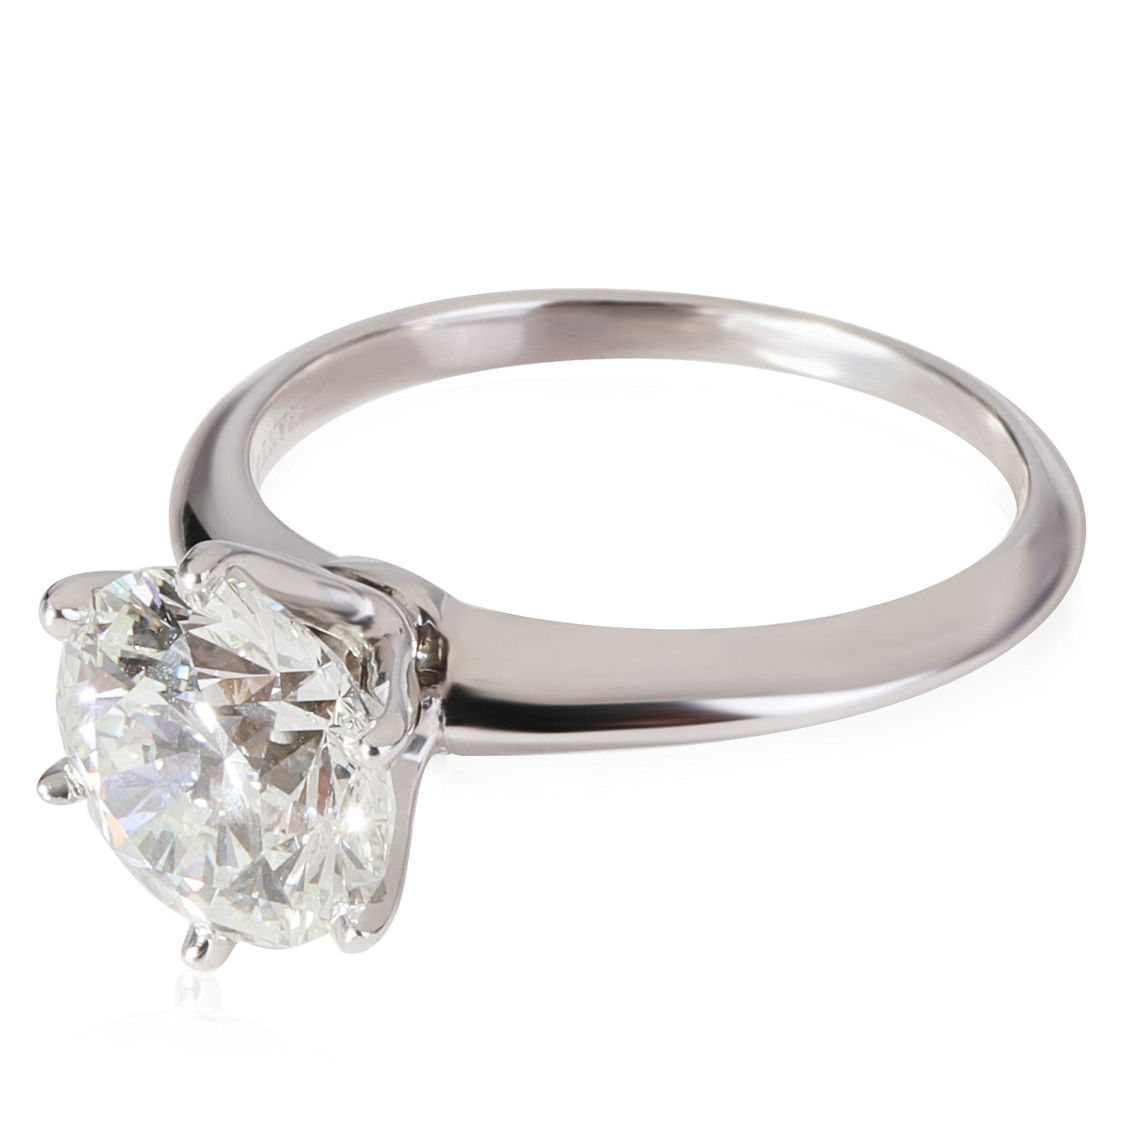 Tiffany & Co. Diamond Engagement Ring in Platinum I VS1 2.17 CTW Pre-Owned - Image 2 of 4